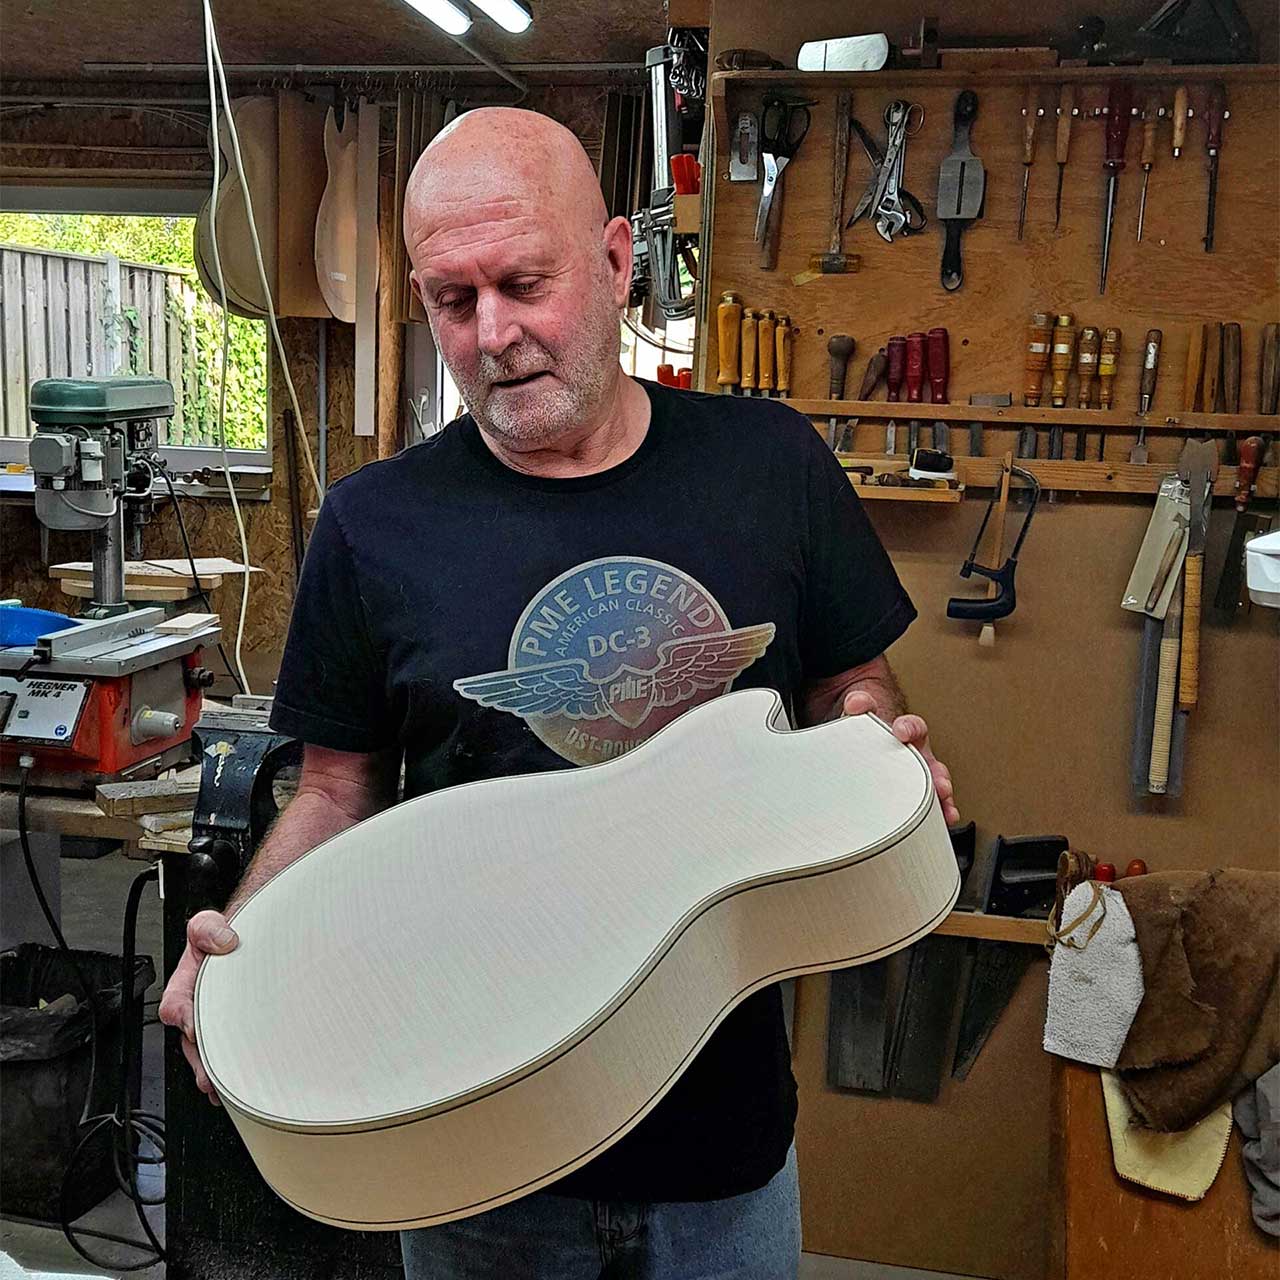 Theo Scharpach Archtop : Explore the art of jazz guitar making - Preview of the creation of an exceptional jazz guitar masterclass in Germany in October 2024. - Luthiers.com